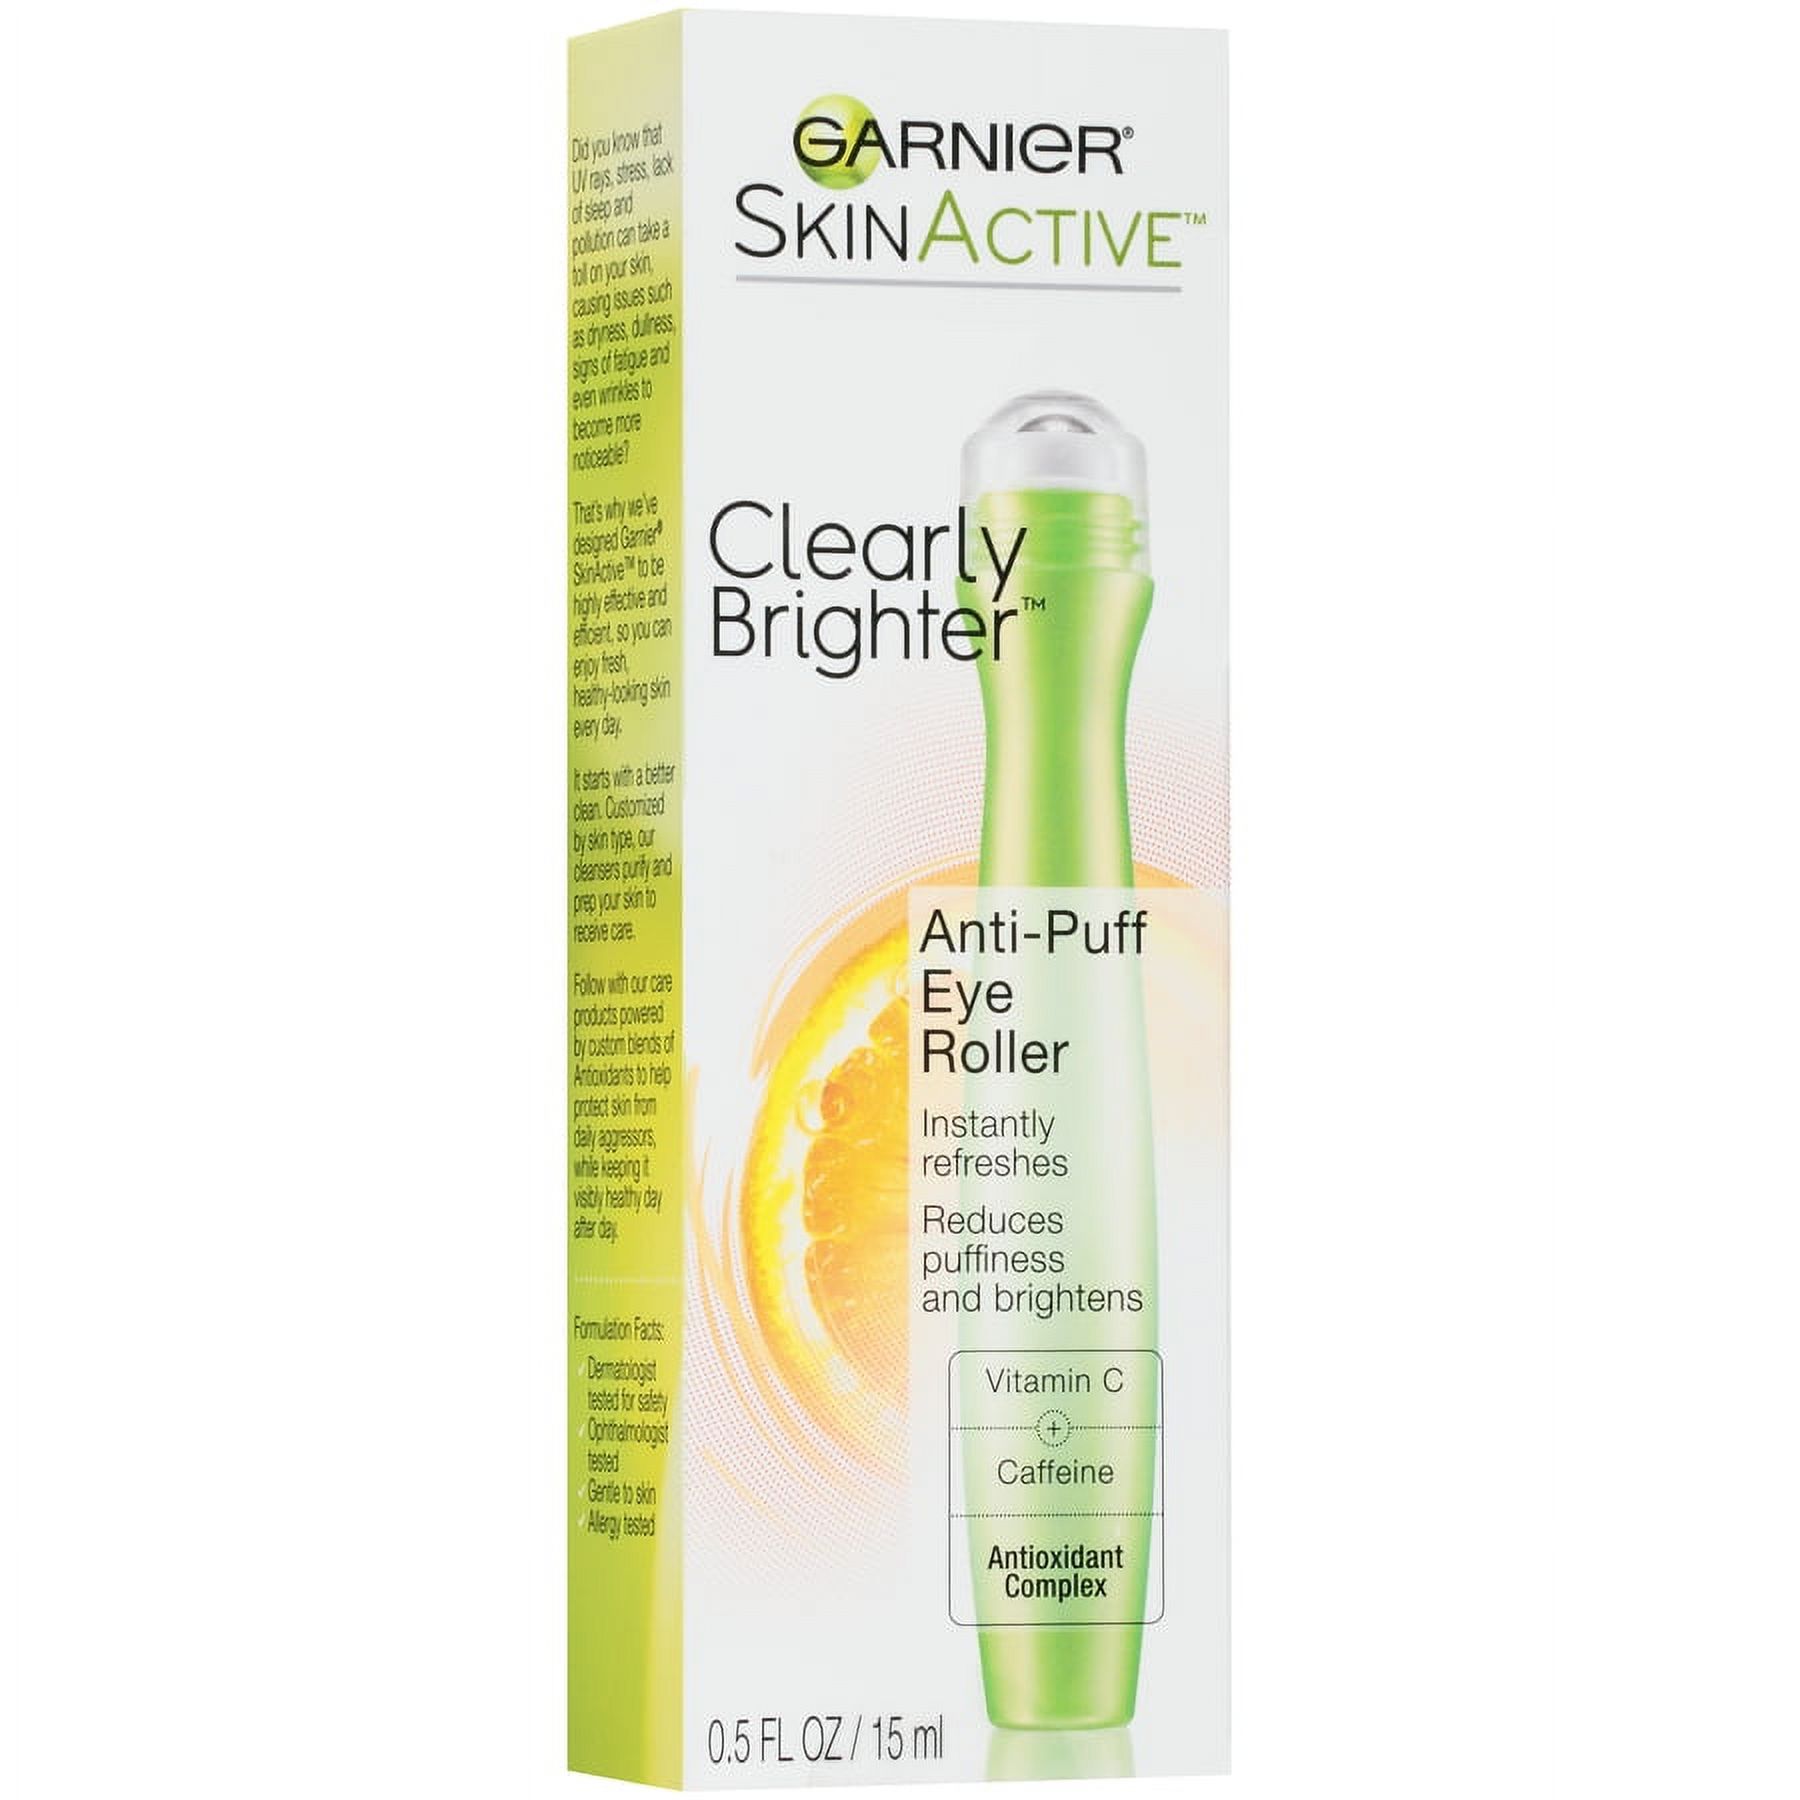 Garnier SkinActive Clearly Brighter Anti Puff Eye Roller, 0.5 fl oz - image 3 of 9